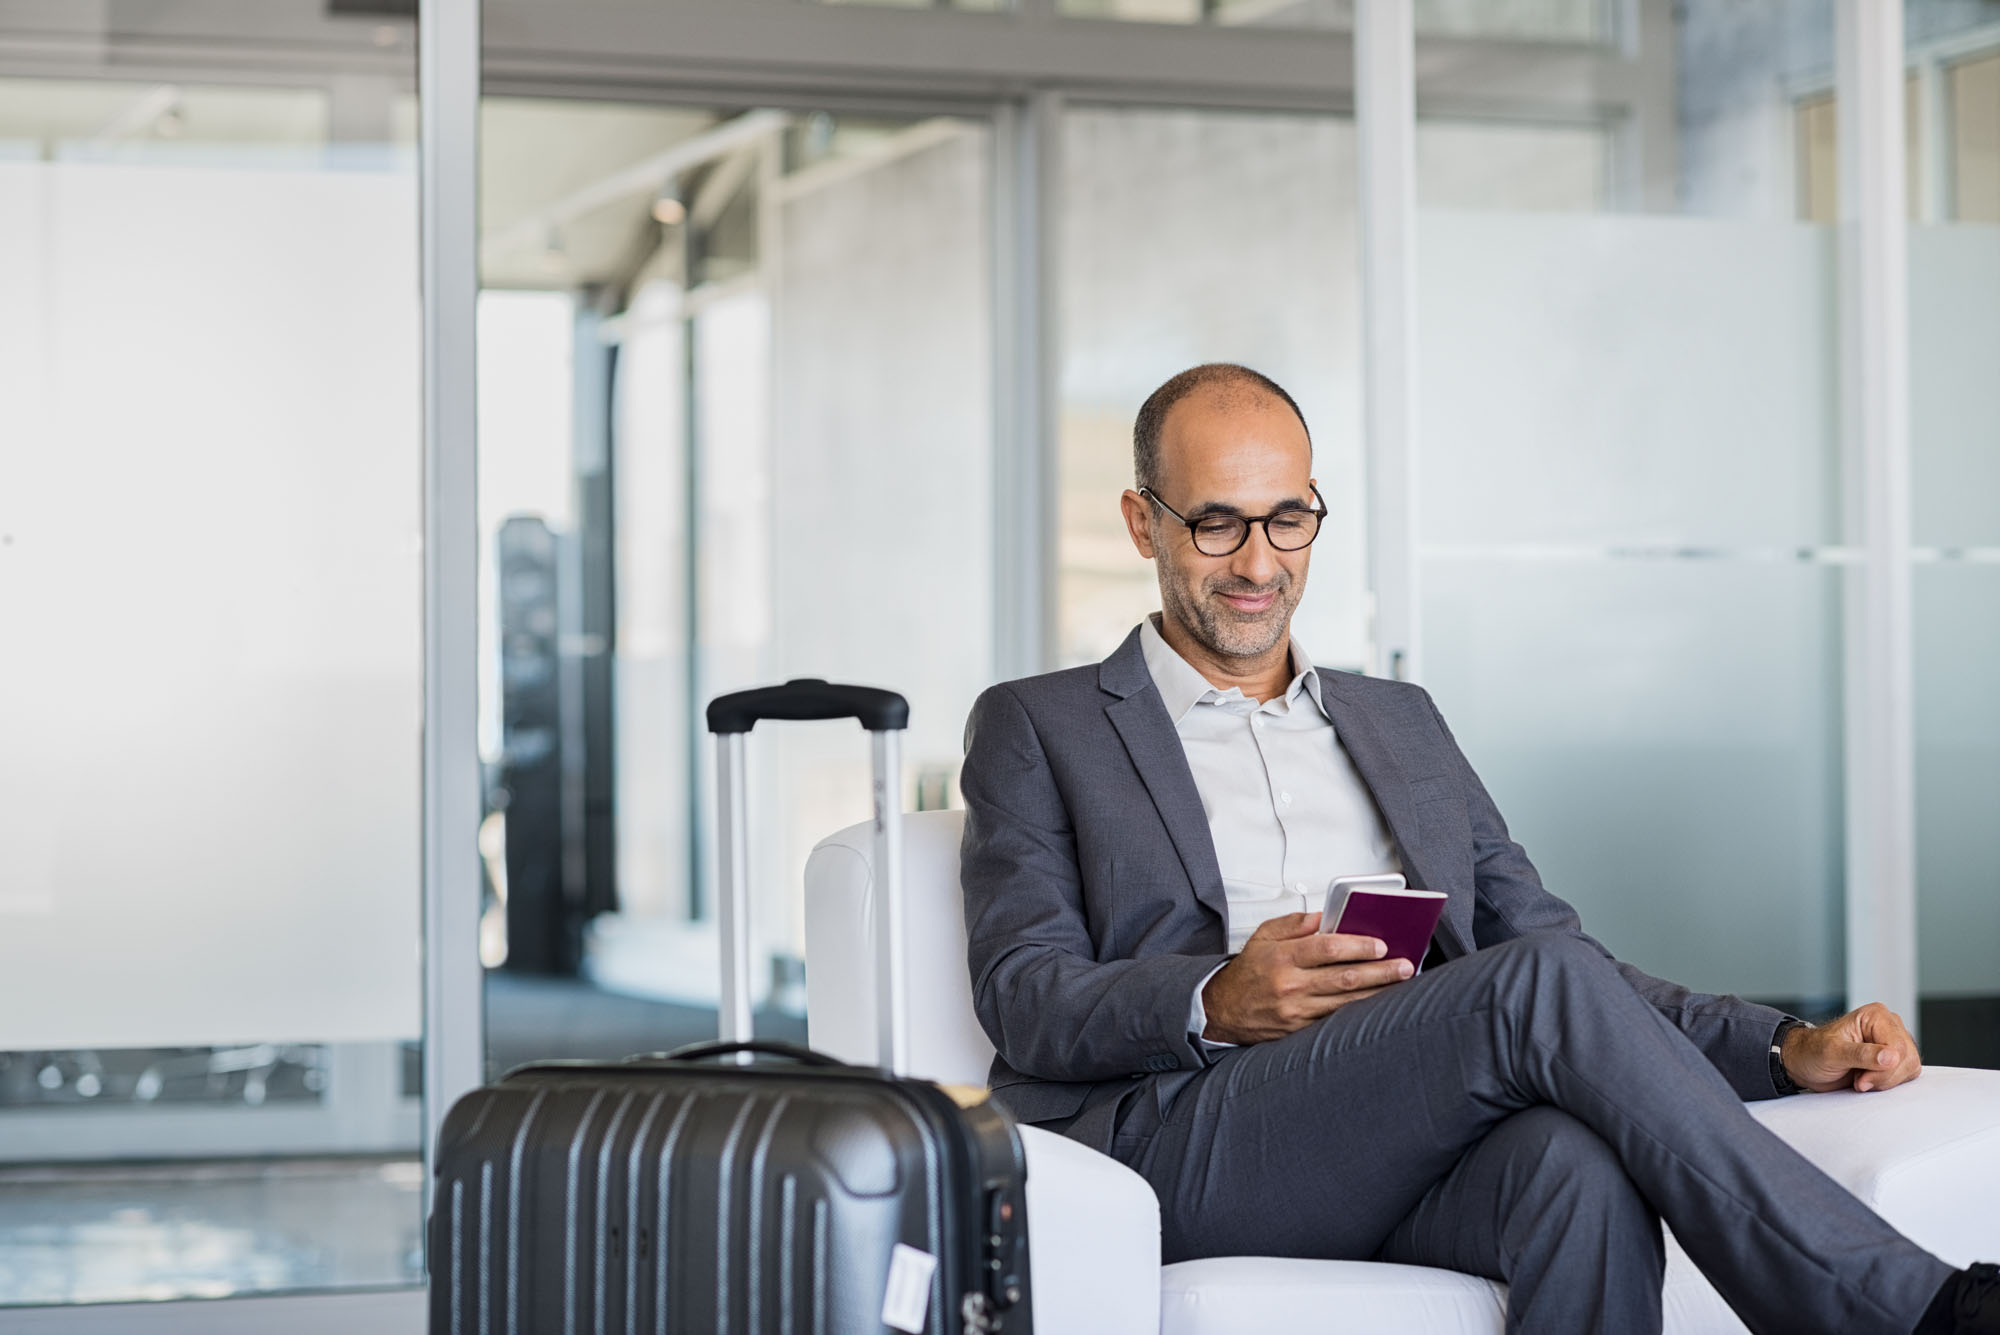 Mature businessman using mobile phone at the airport in the waiting room. Business man typing on smartphone in lounge area. Portrait of latin man sitting and holding passport with luggage.